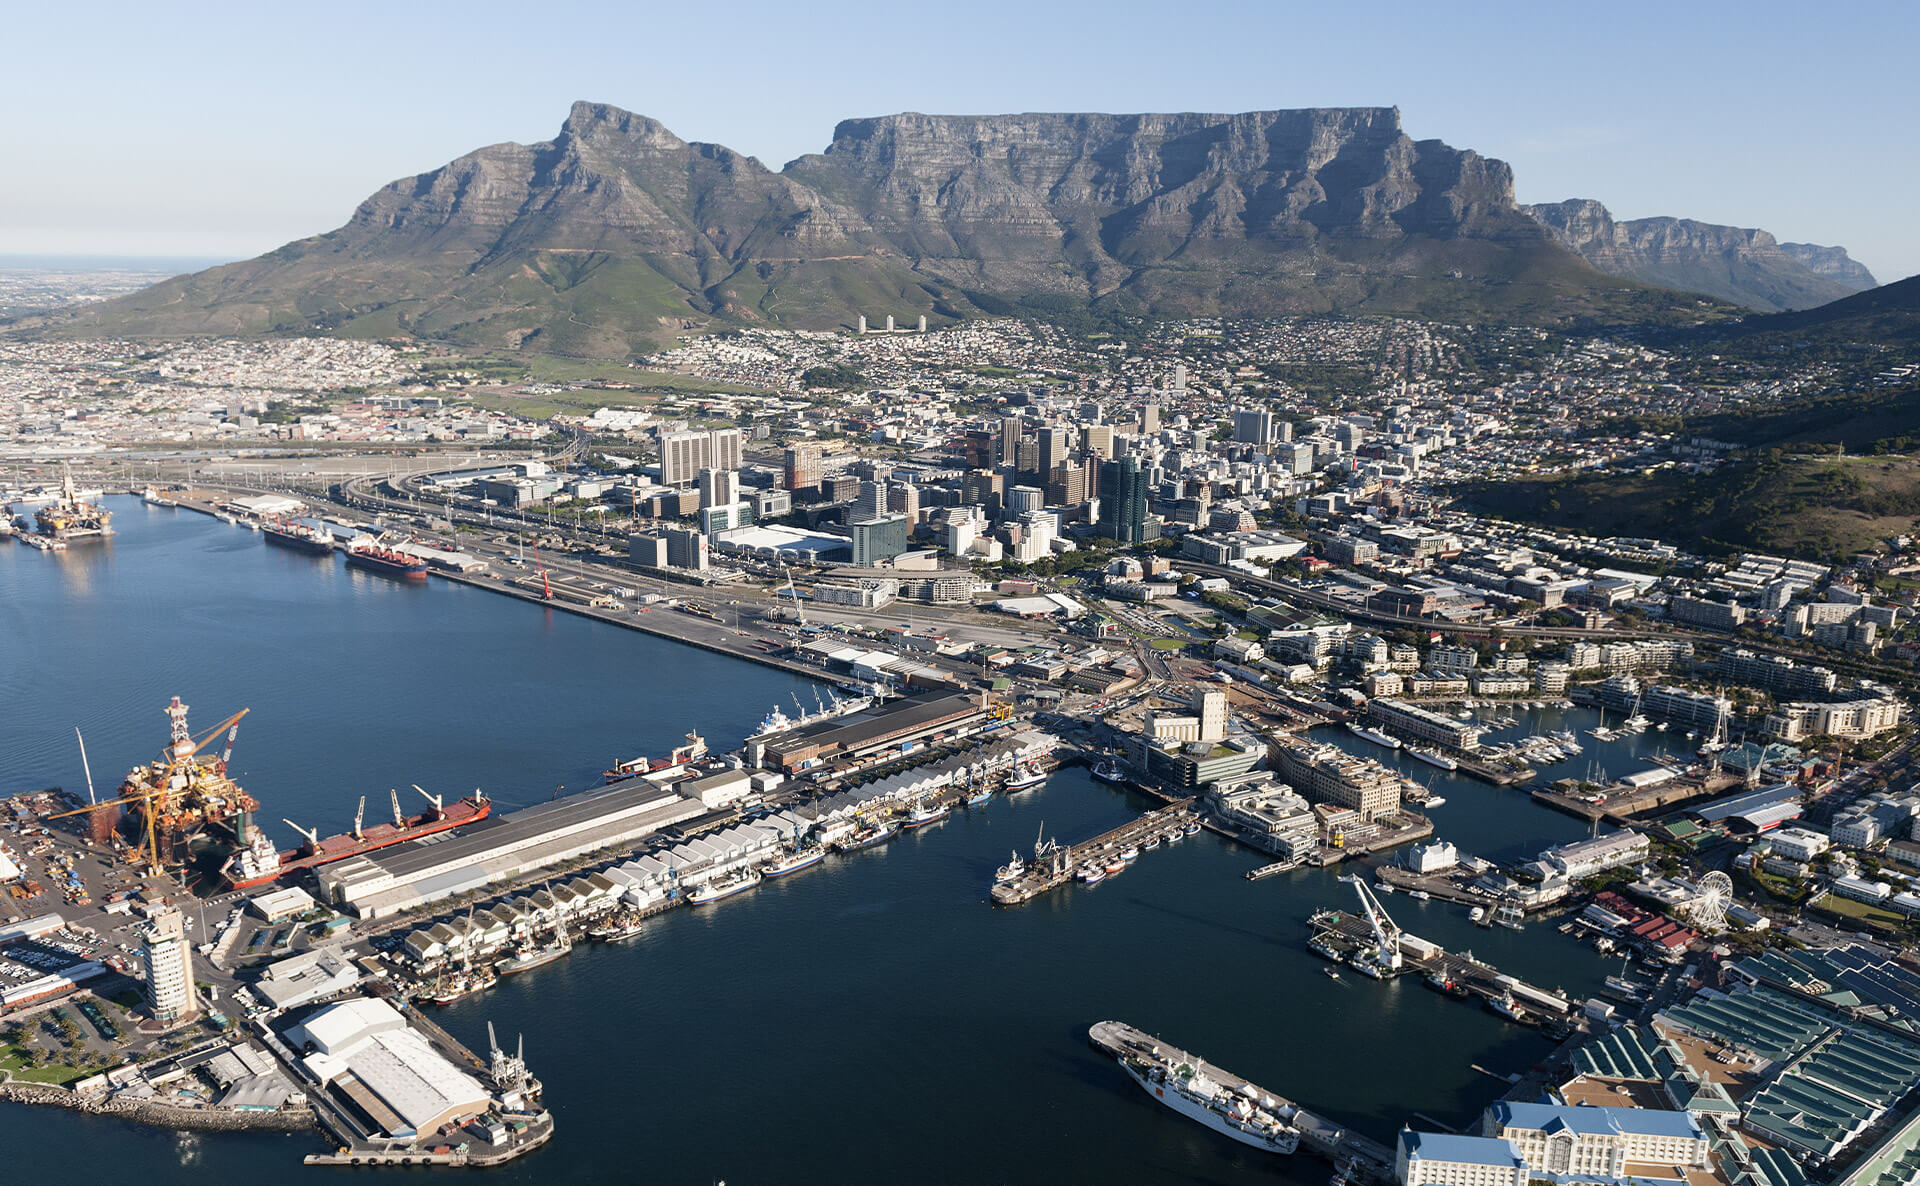 PORT OF CAPE TOWN – Investment to Position Port Among SA’s Finest